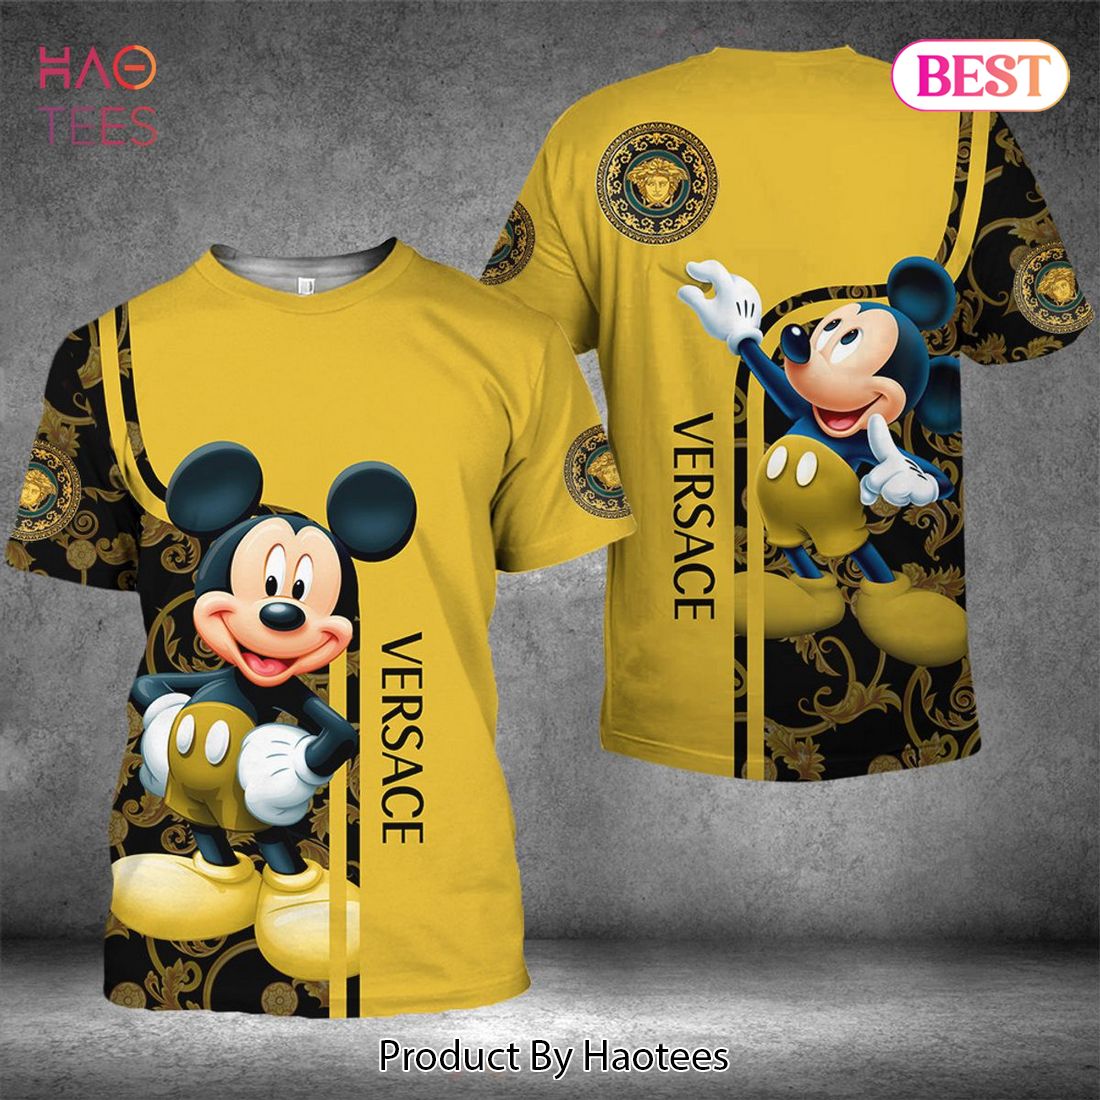 HOT Versace Mickey Mouse Luxury Brand 3D T-Shirt Limited Edition